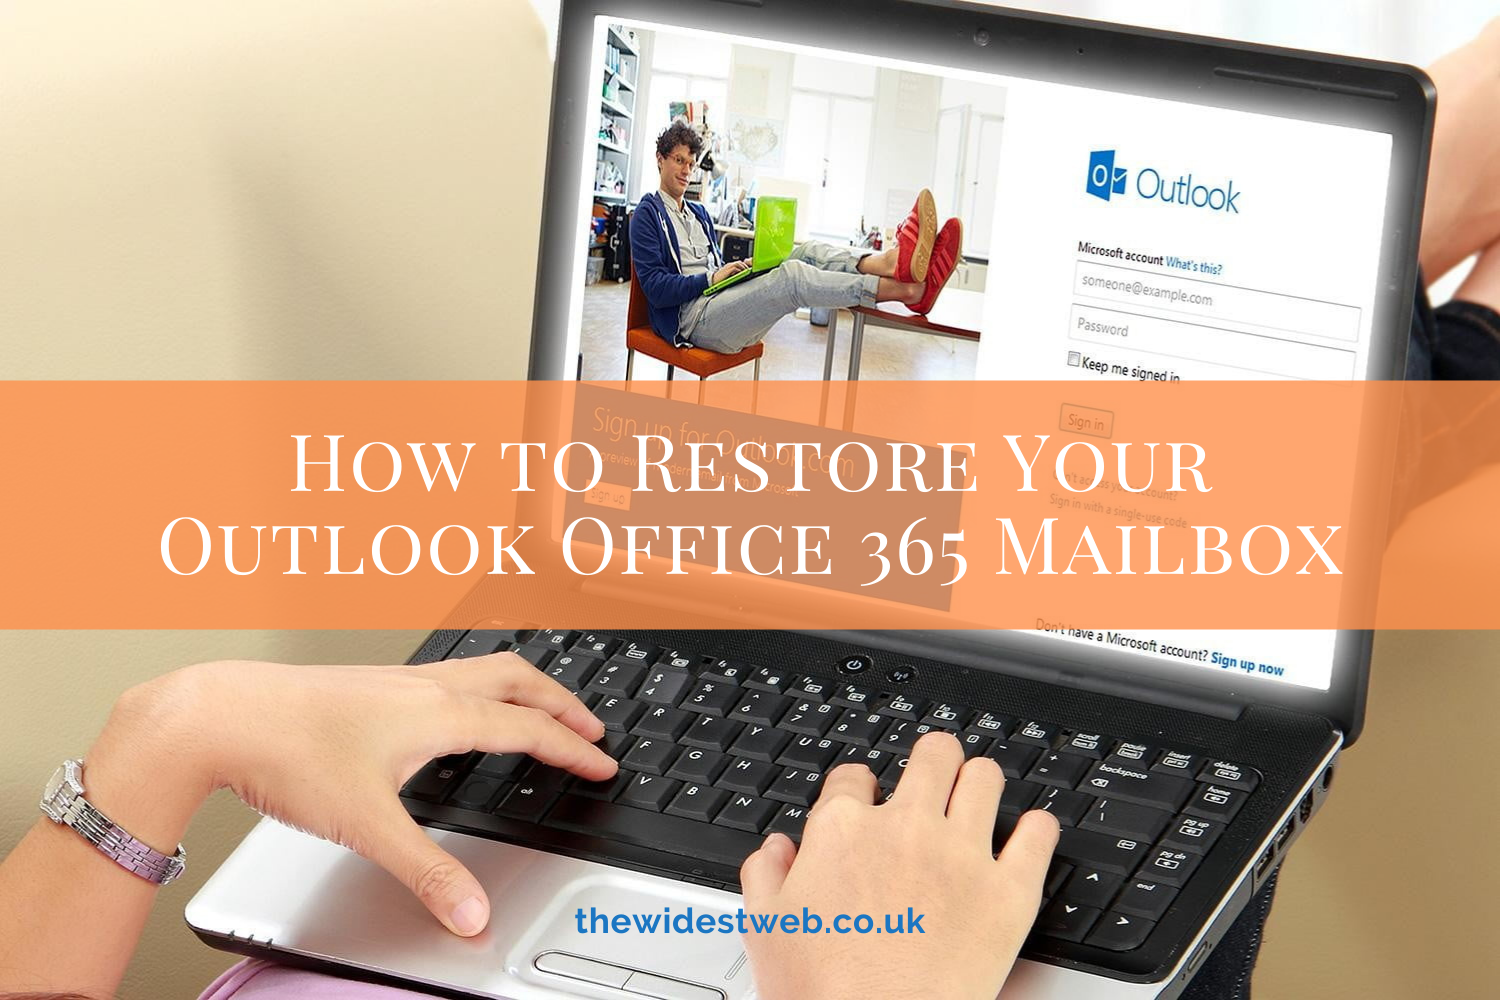 How to Restore Your Outlook Office 365 Mailbox Fast & Free?